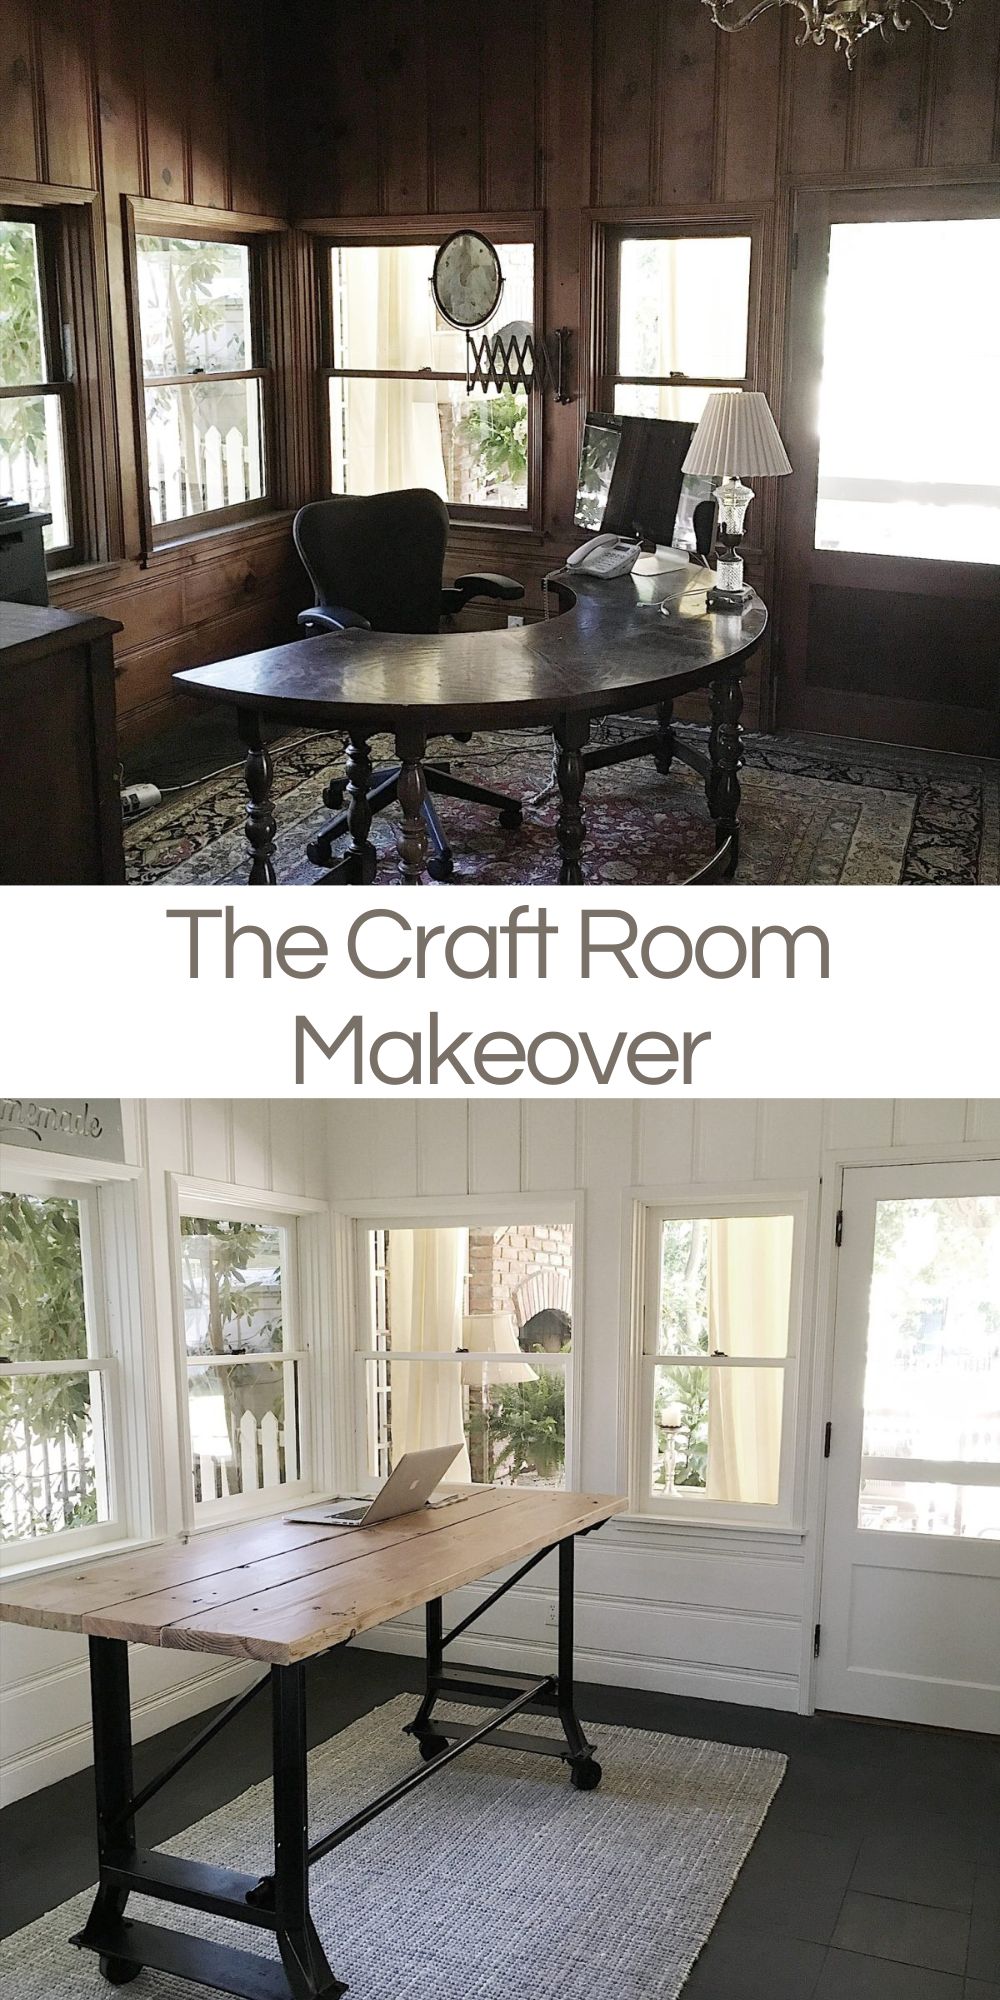 Every time I look at my craft room I cannot believe the before and after. If you haven't seen this, you won't believe it. I love this after photo!